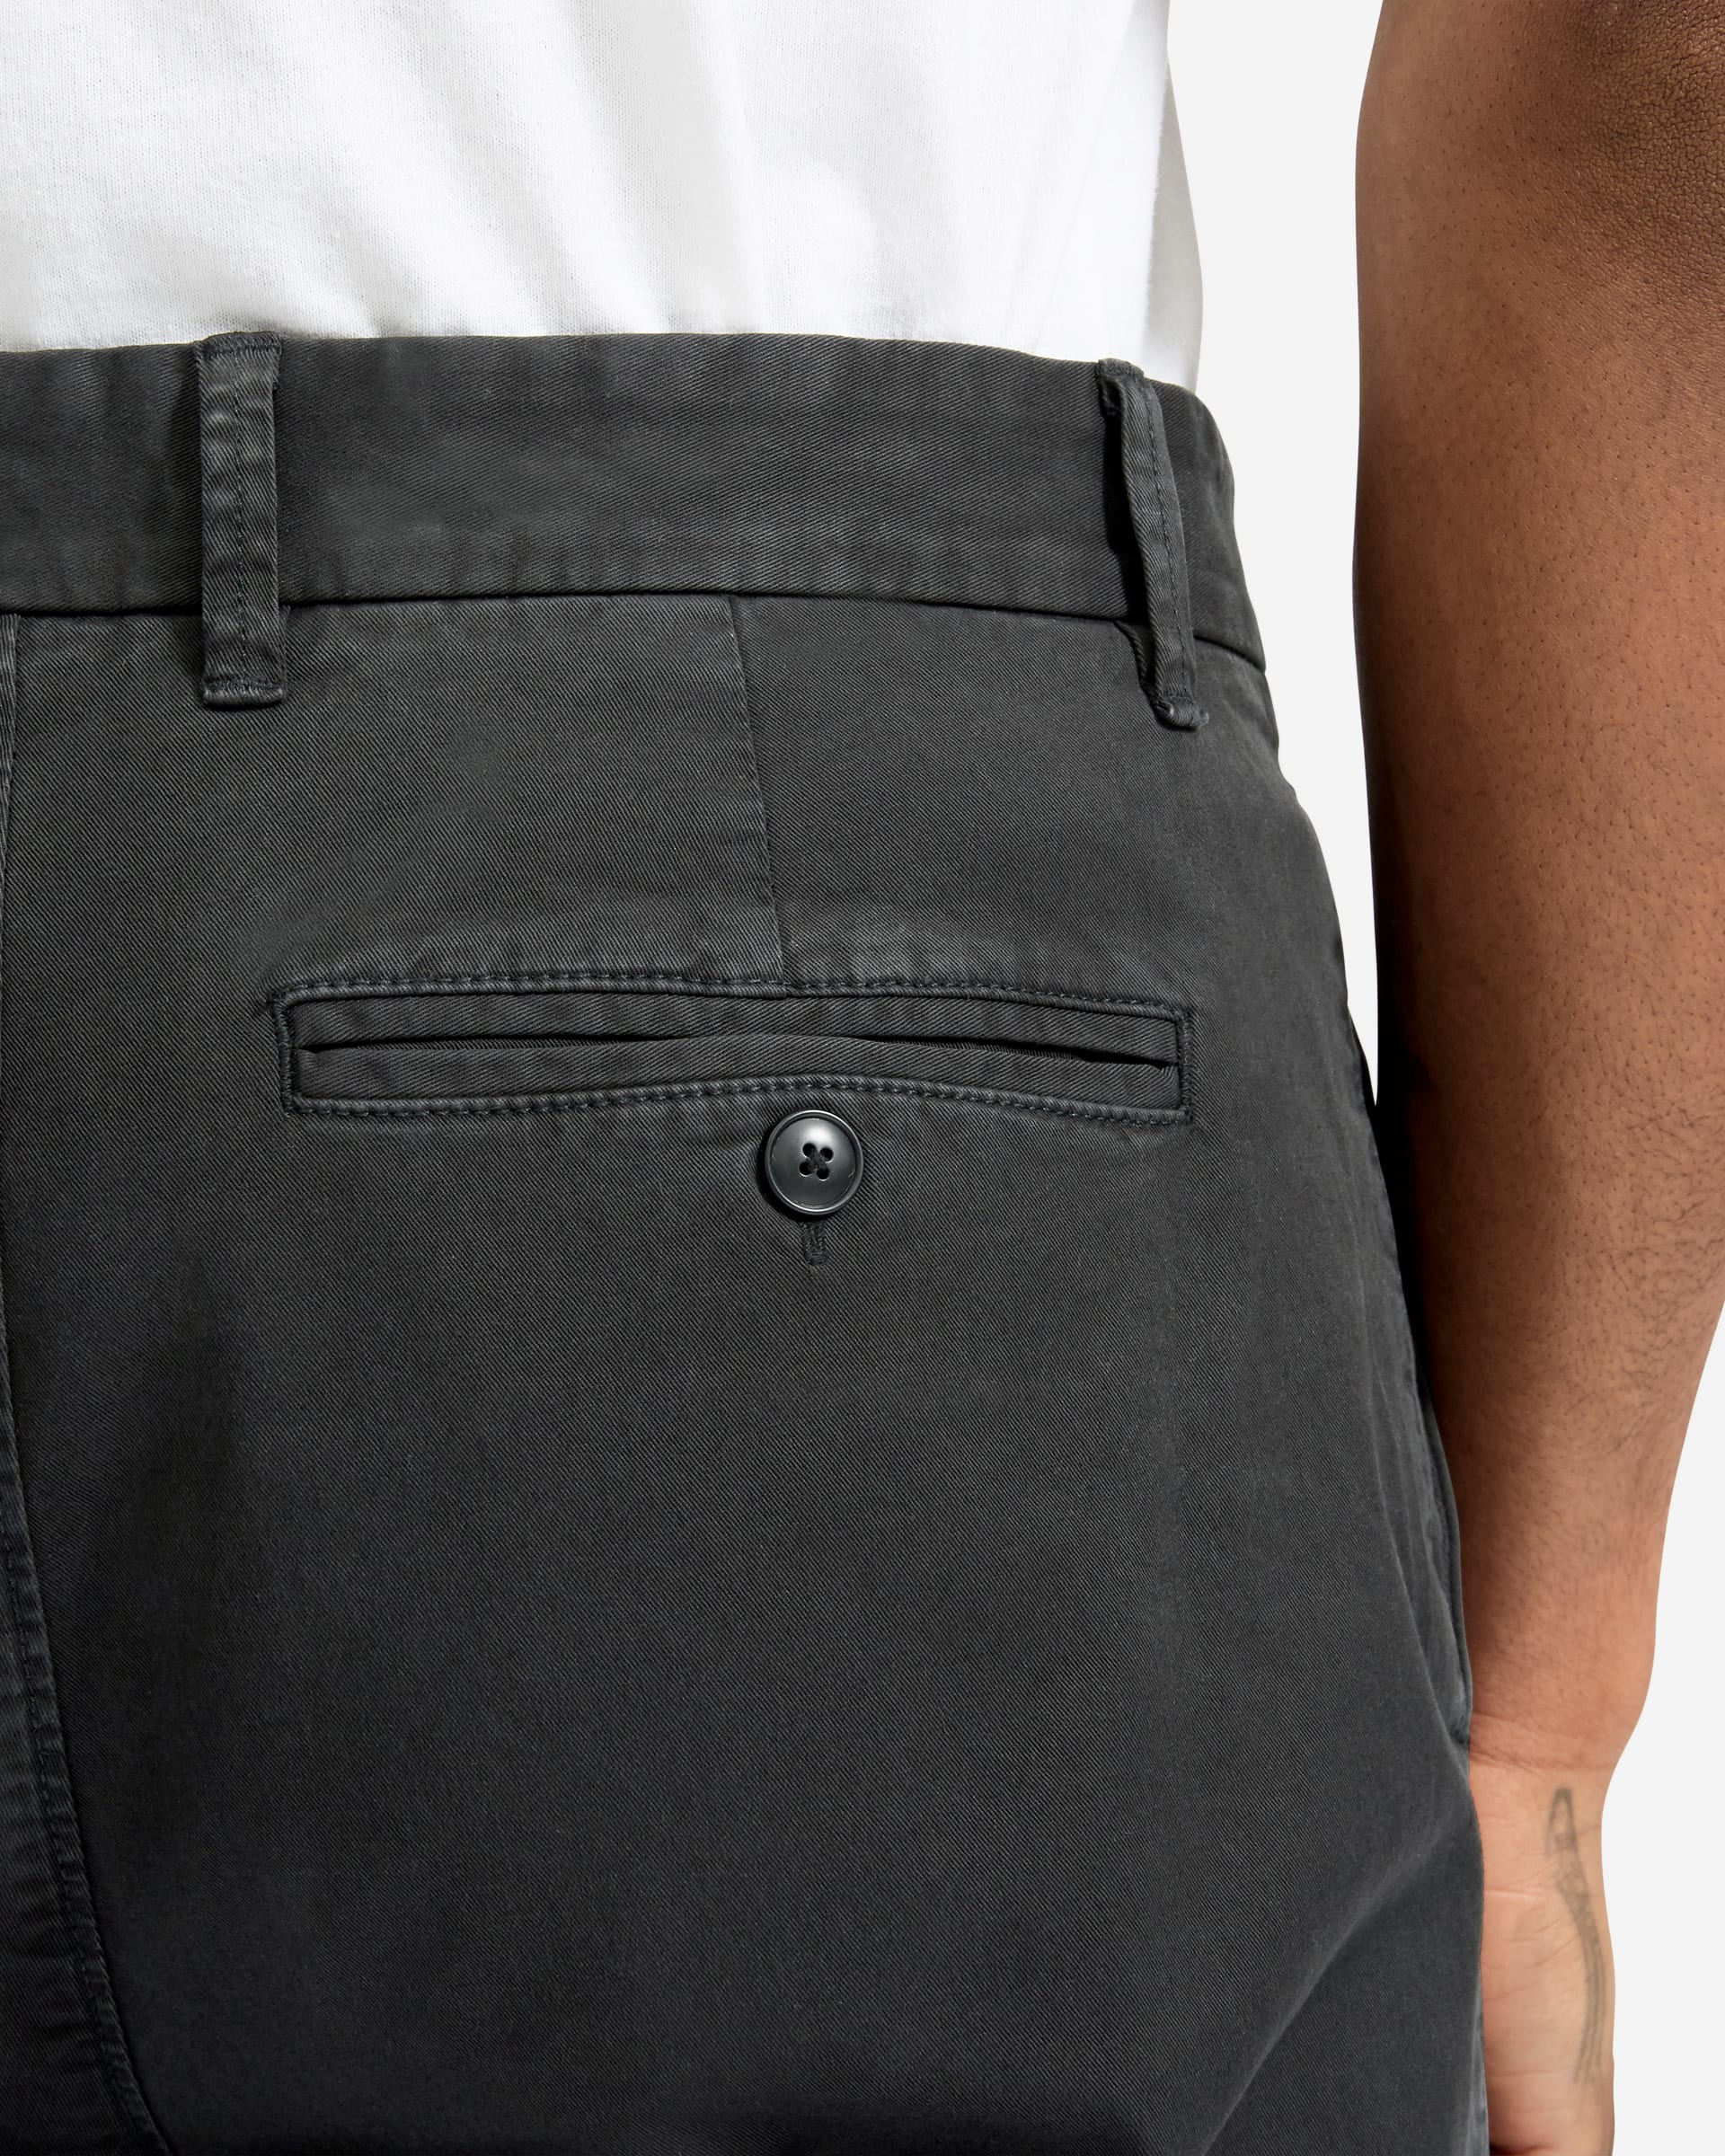 The Midweight Chino 9